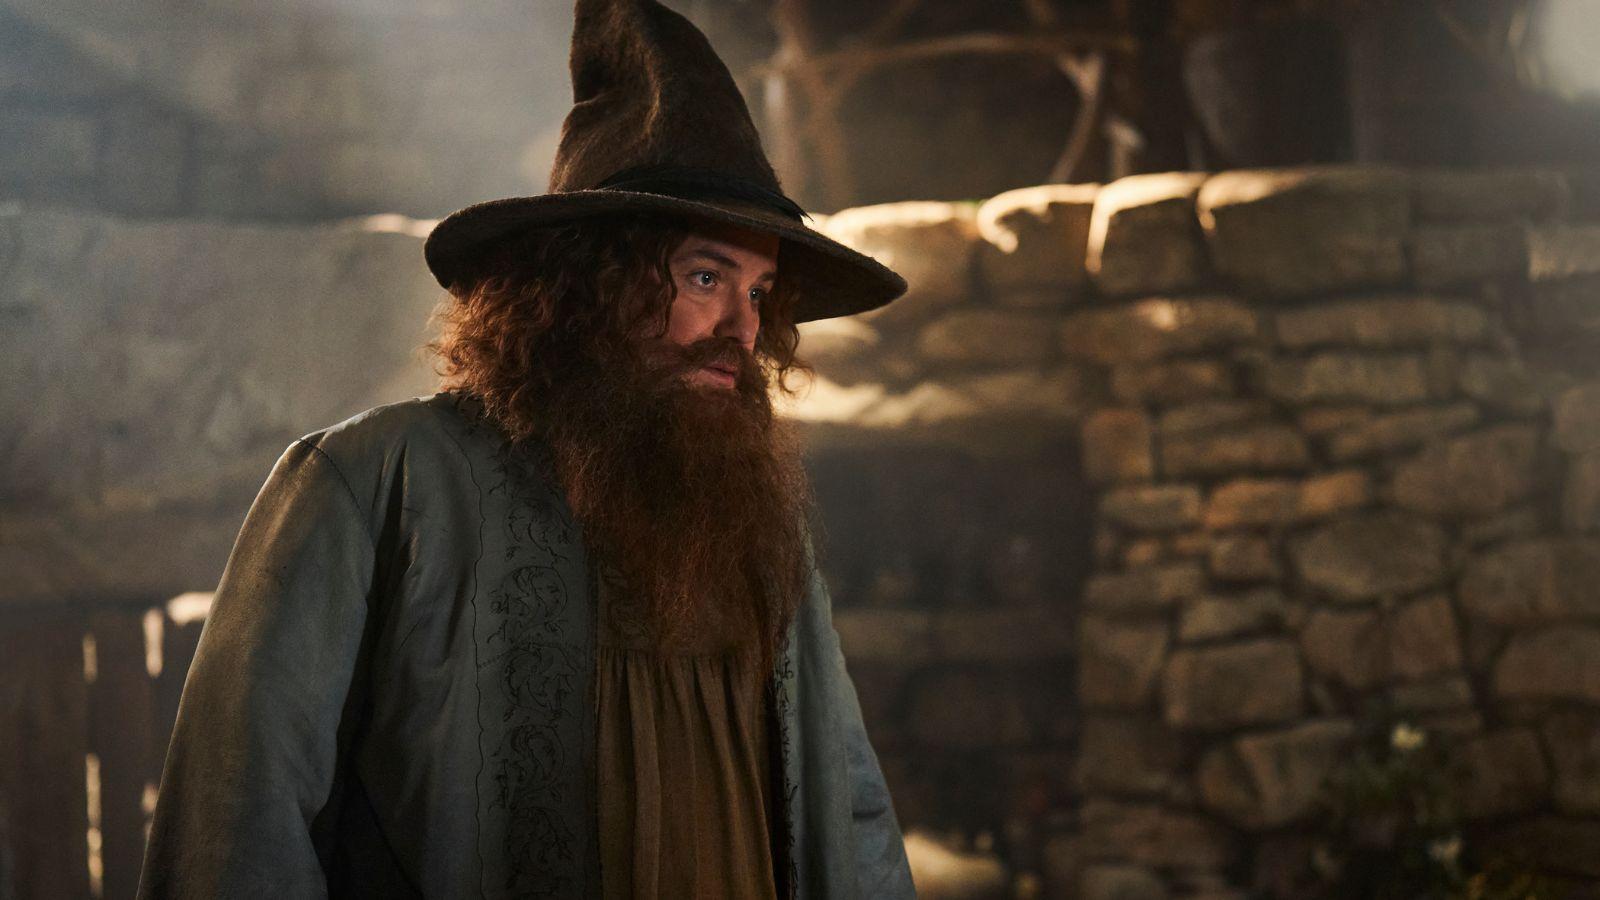 Rory Kinnear as Tom Bombadil in LORD OF THE RINGS: THE RINGS OF POWER Season 2.